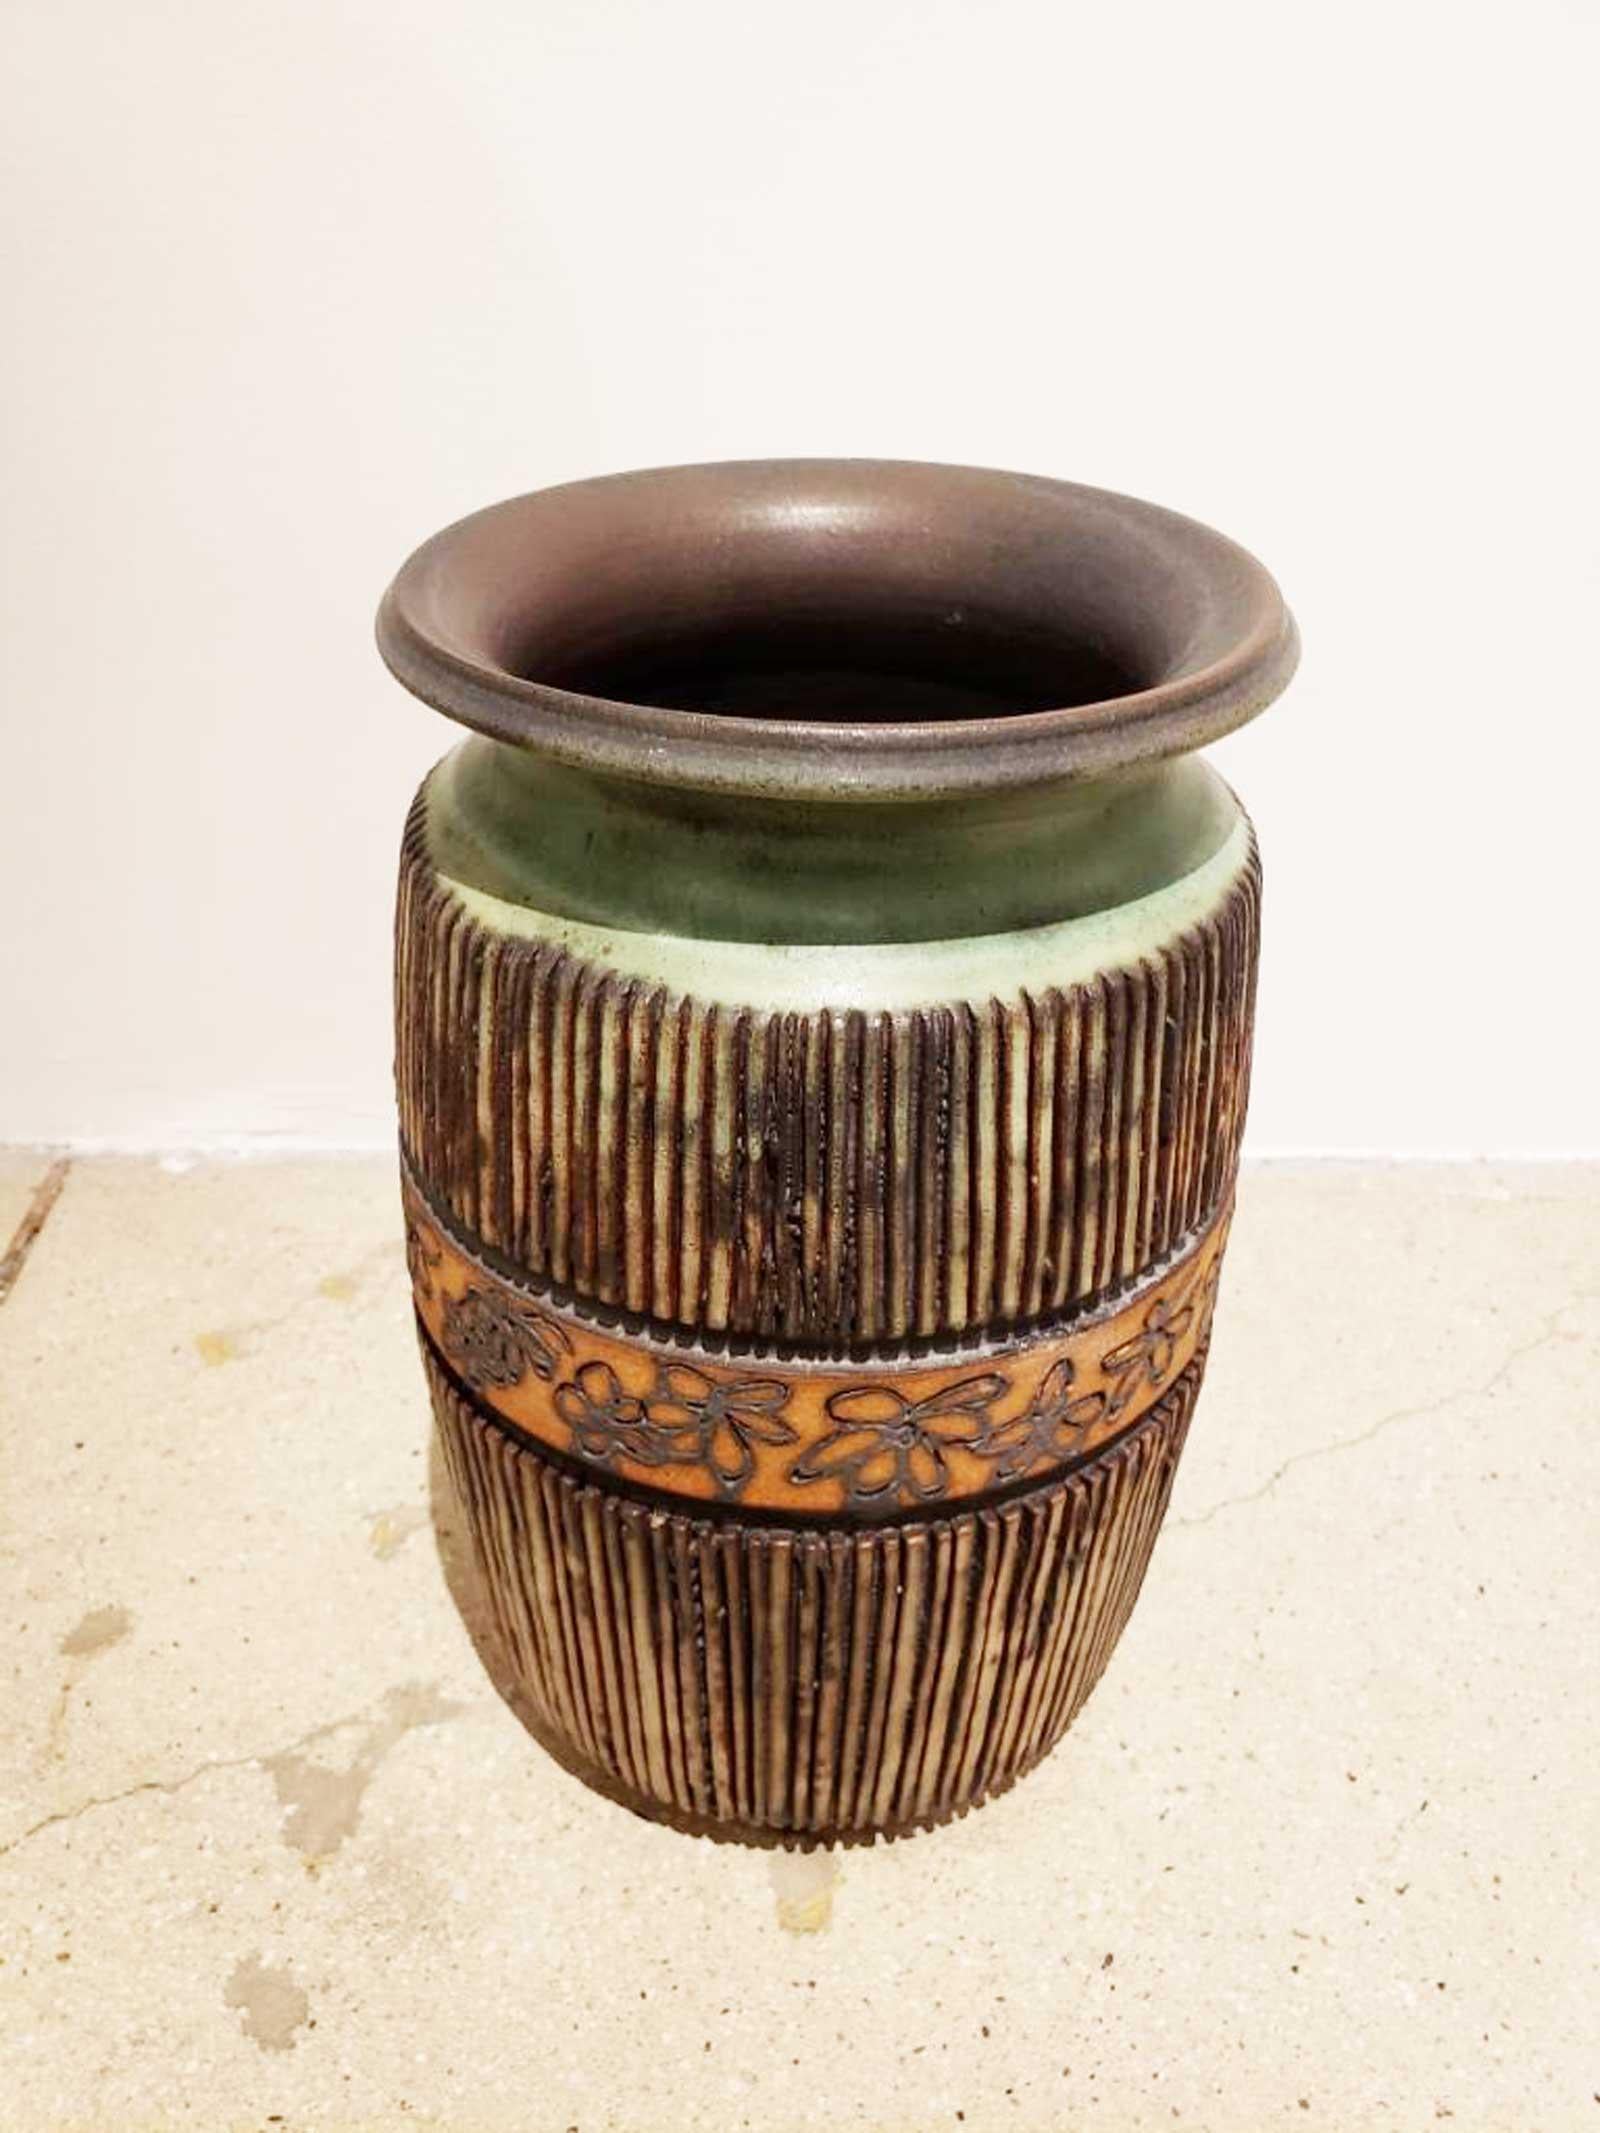 Beautiful vase by Bergloff, a Californian pottery maker. He worked in the San Francisco Bay area.